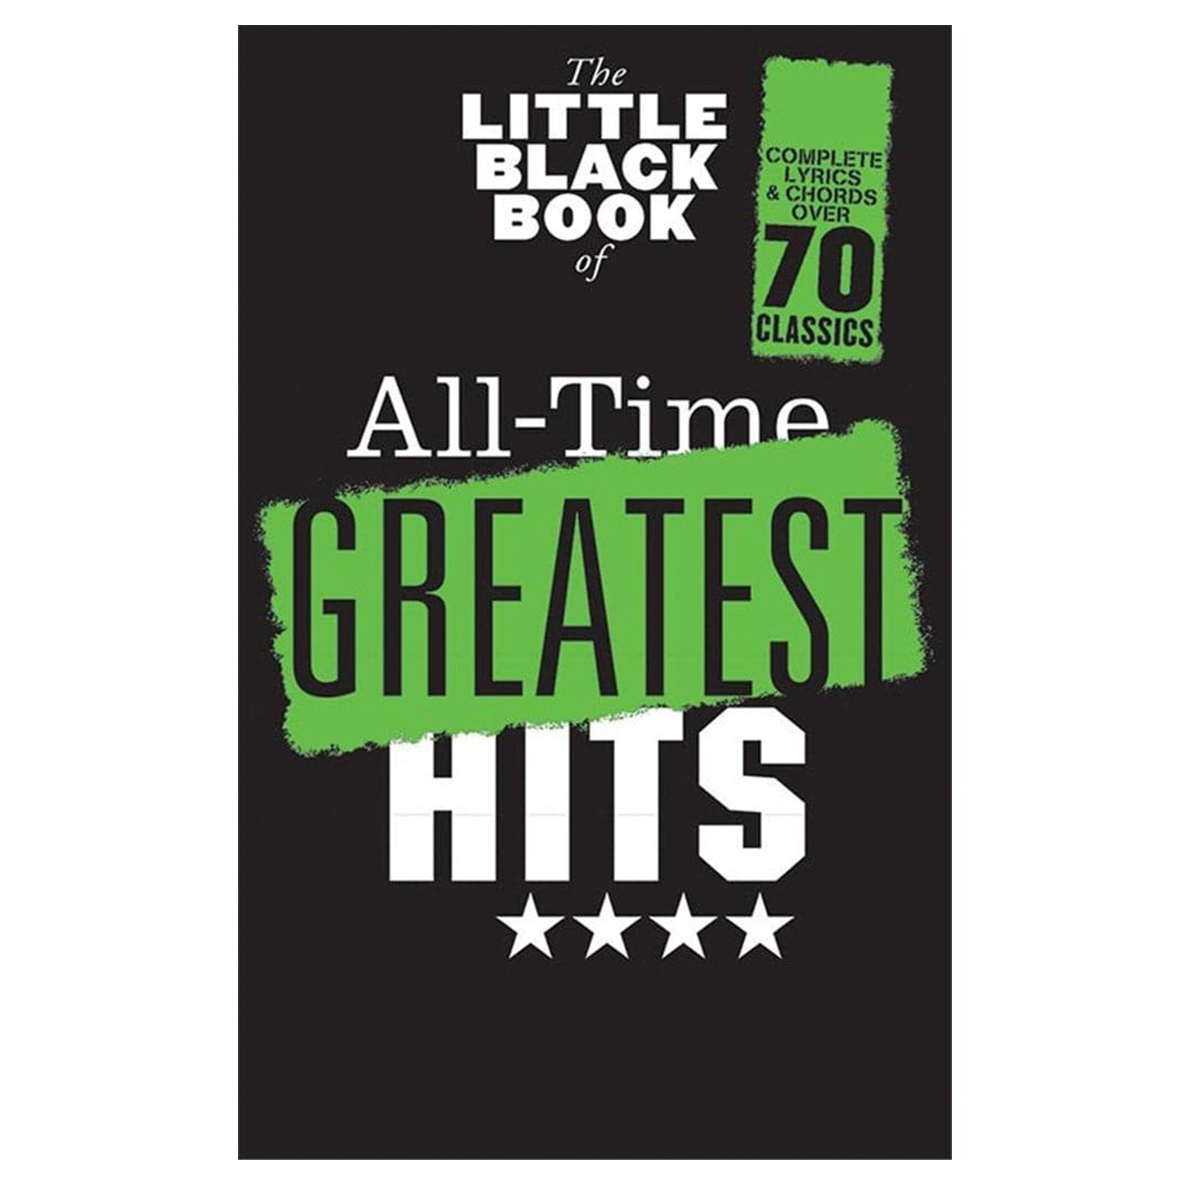 The Little Black Book - All Time Greatest Hits